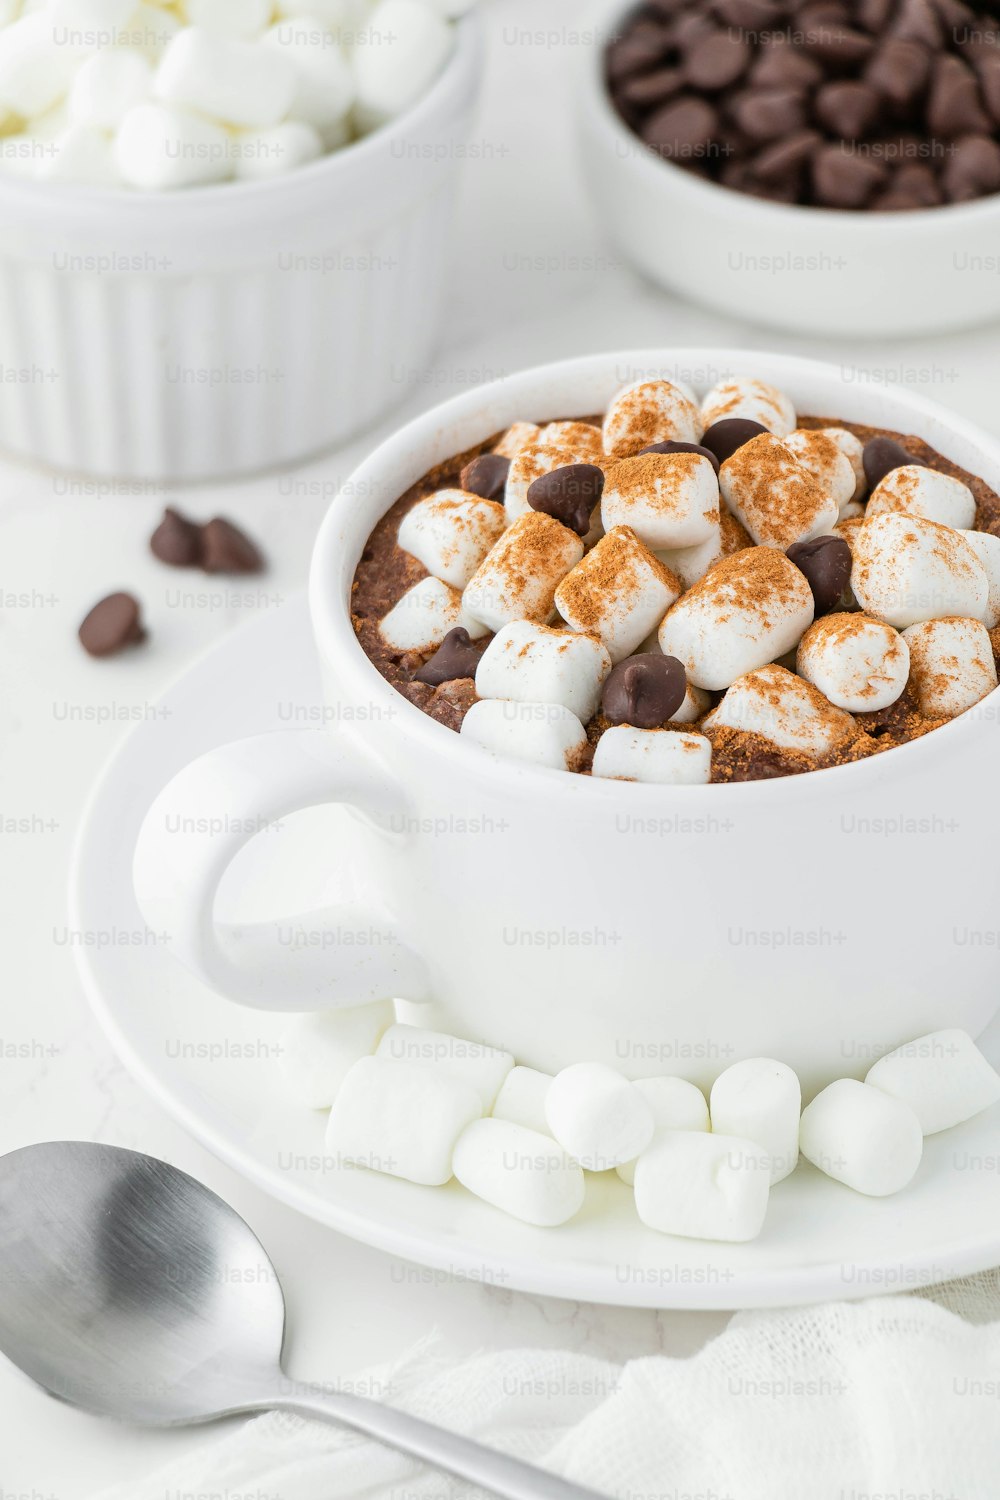 a bowl of hot chocolate with marshmallows and chocolate chips